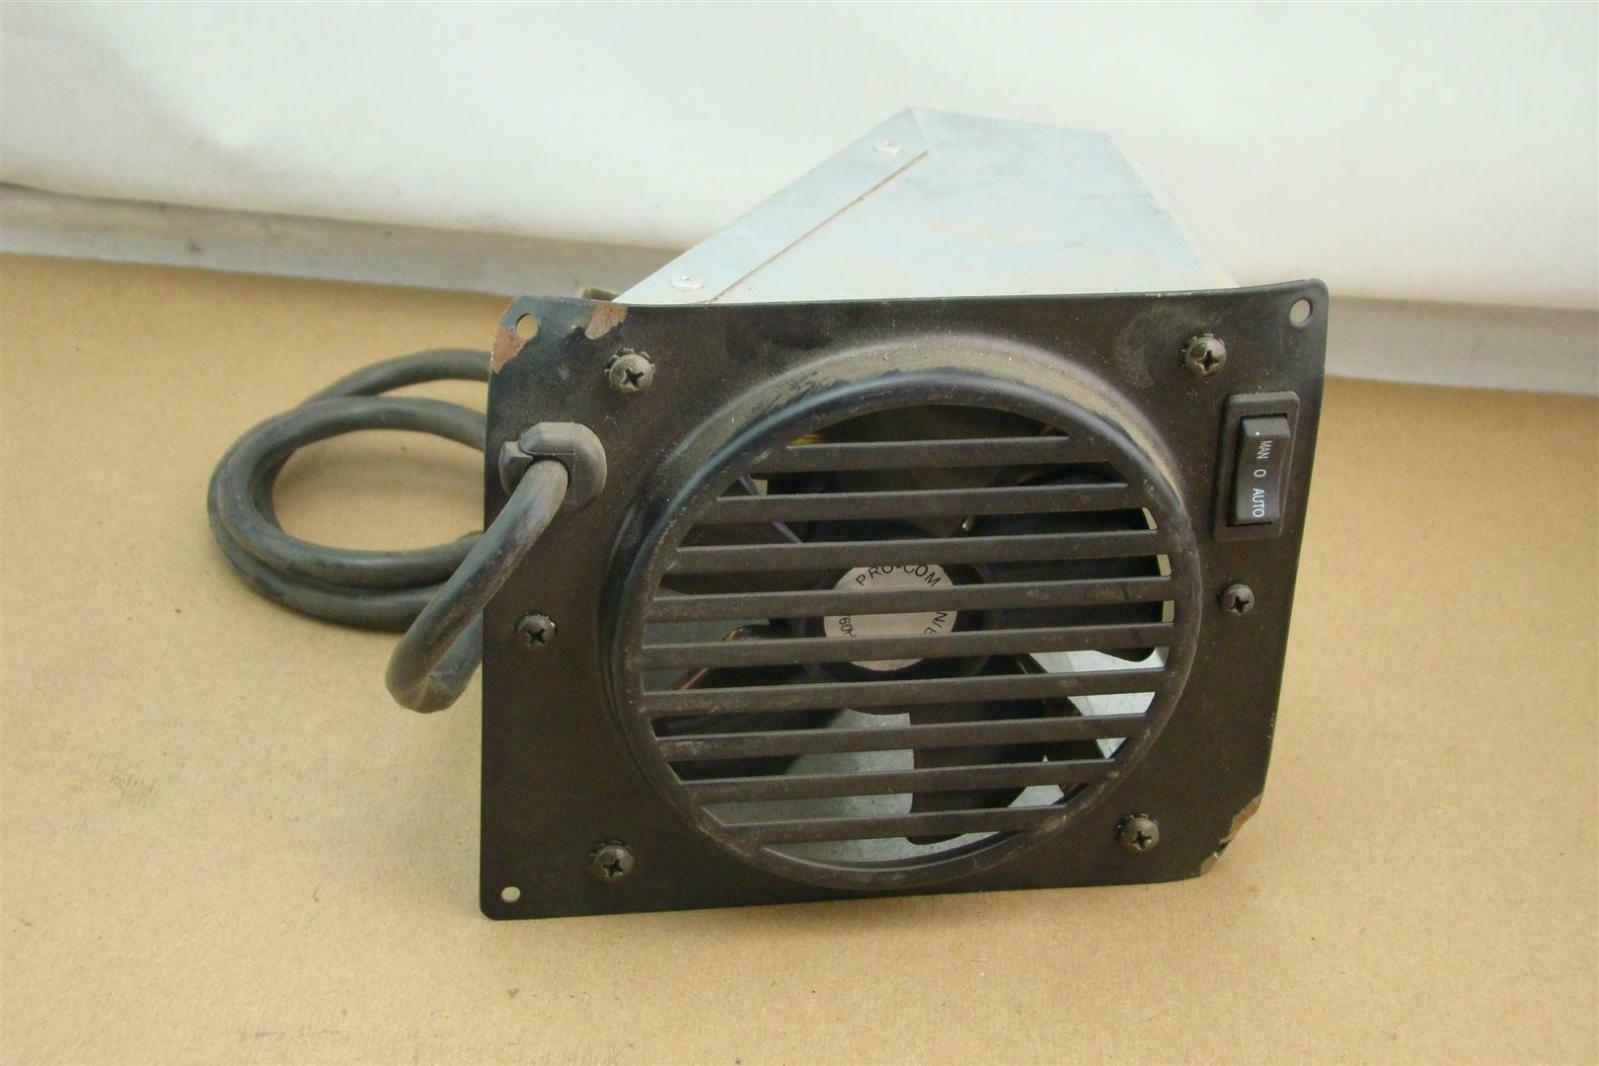 Procom Wall Heater Blower 120v 60hz 0282 Amps Pf06 Yjlf B intended for proportions 1599 X 1066